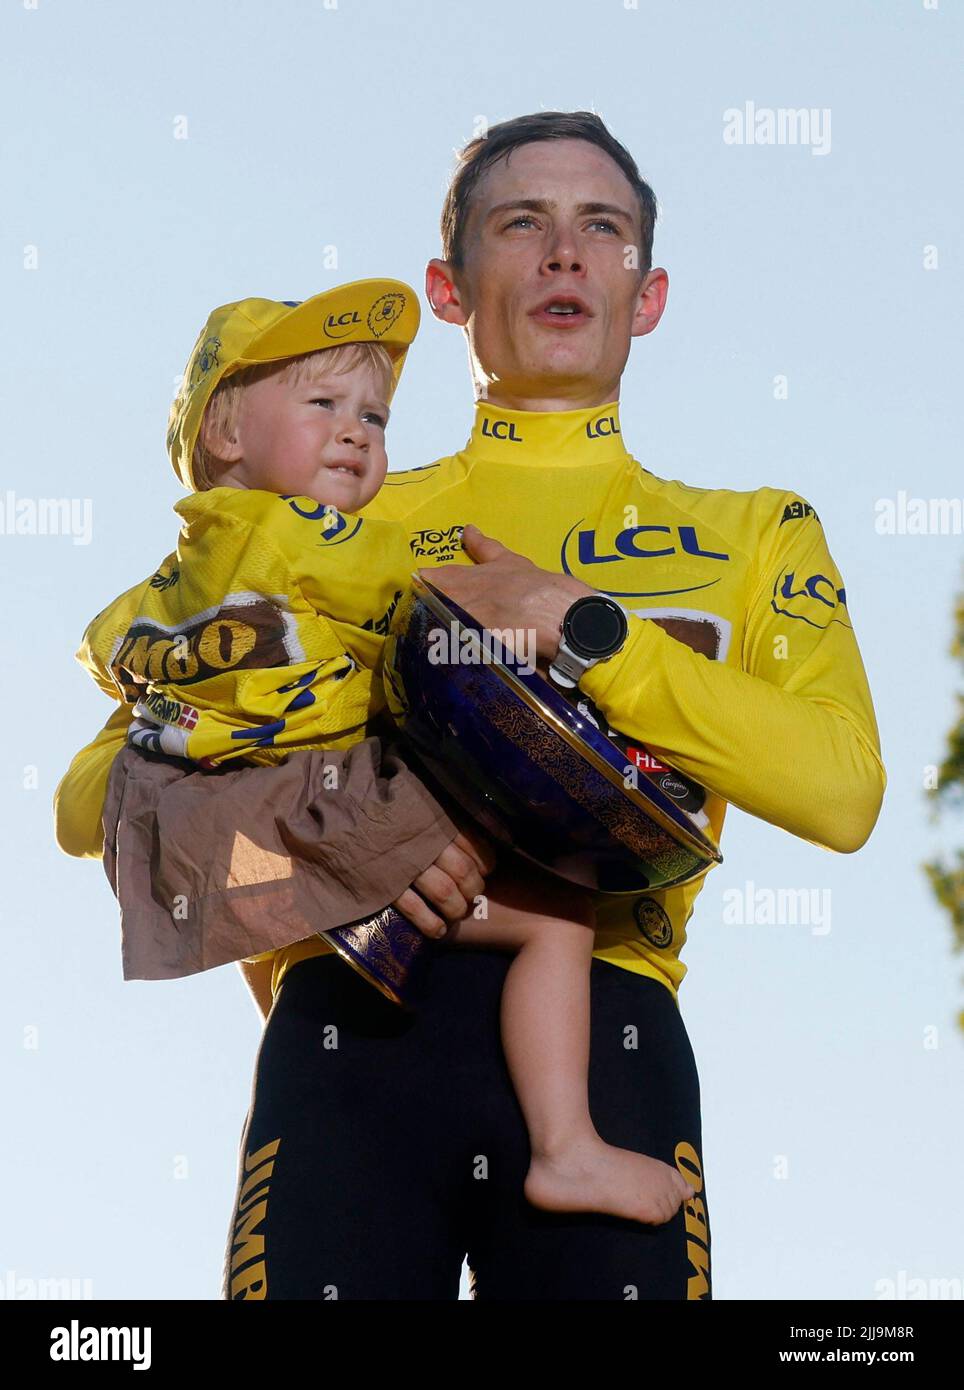 Cycling - Tour de France - Stage 21 - Paris La Defense Arena to Champs-Elysees - France - July 24, 2022 Jumbo - Visma's Jonas Vingegaard with his daughter Frida celebrates on the podium wearing the overall leader's yellow jersey after winning the Tour de France REUTERS/Gonzalo Fuentes Stock Photo